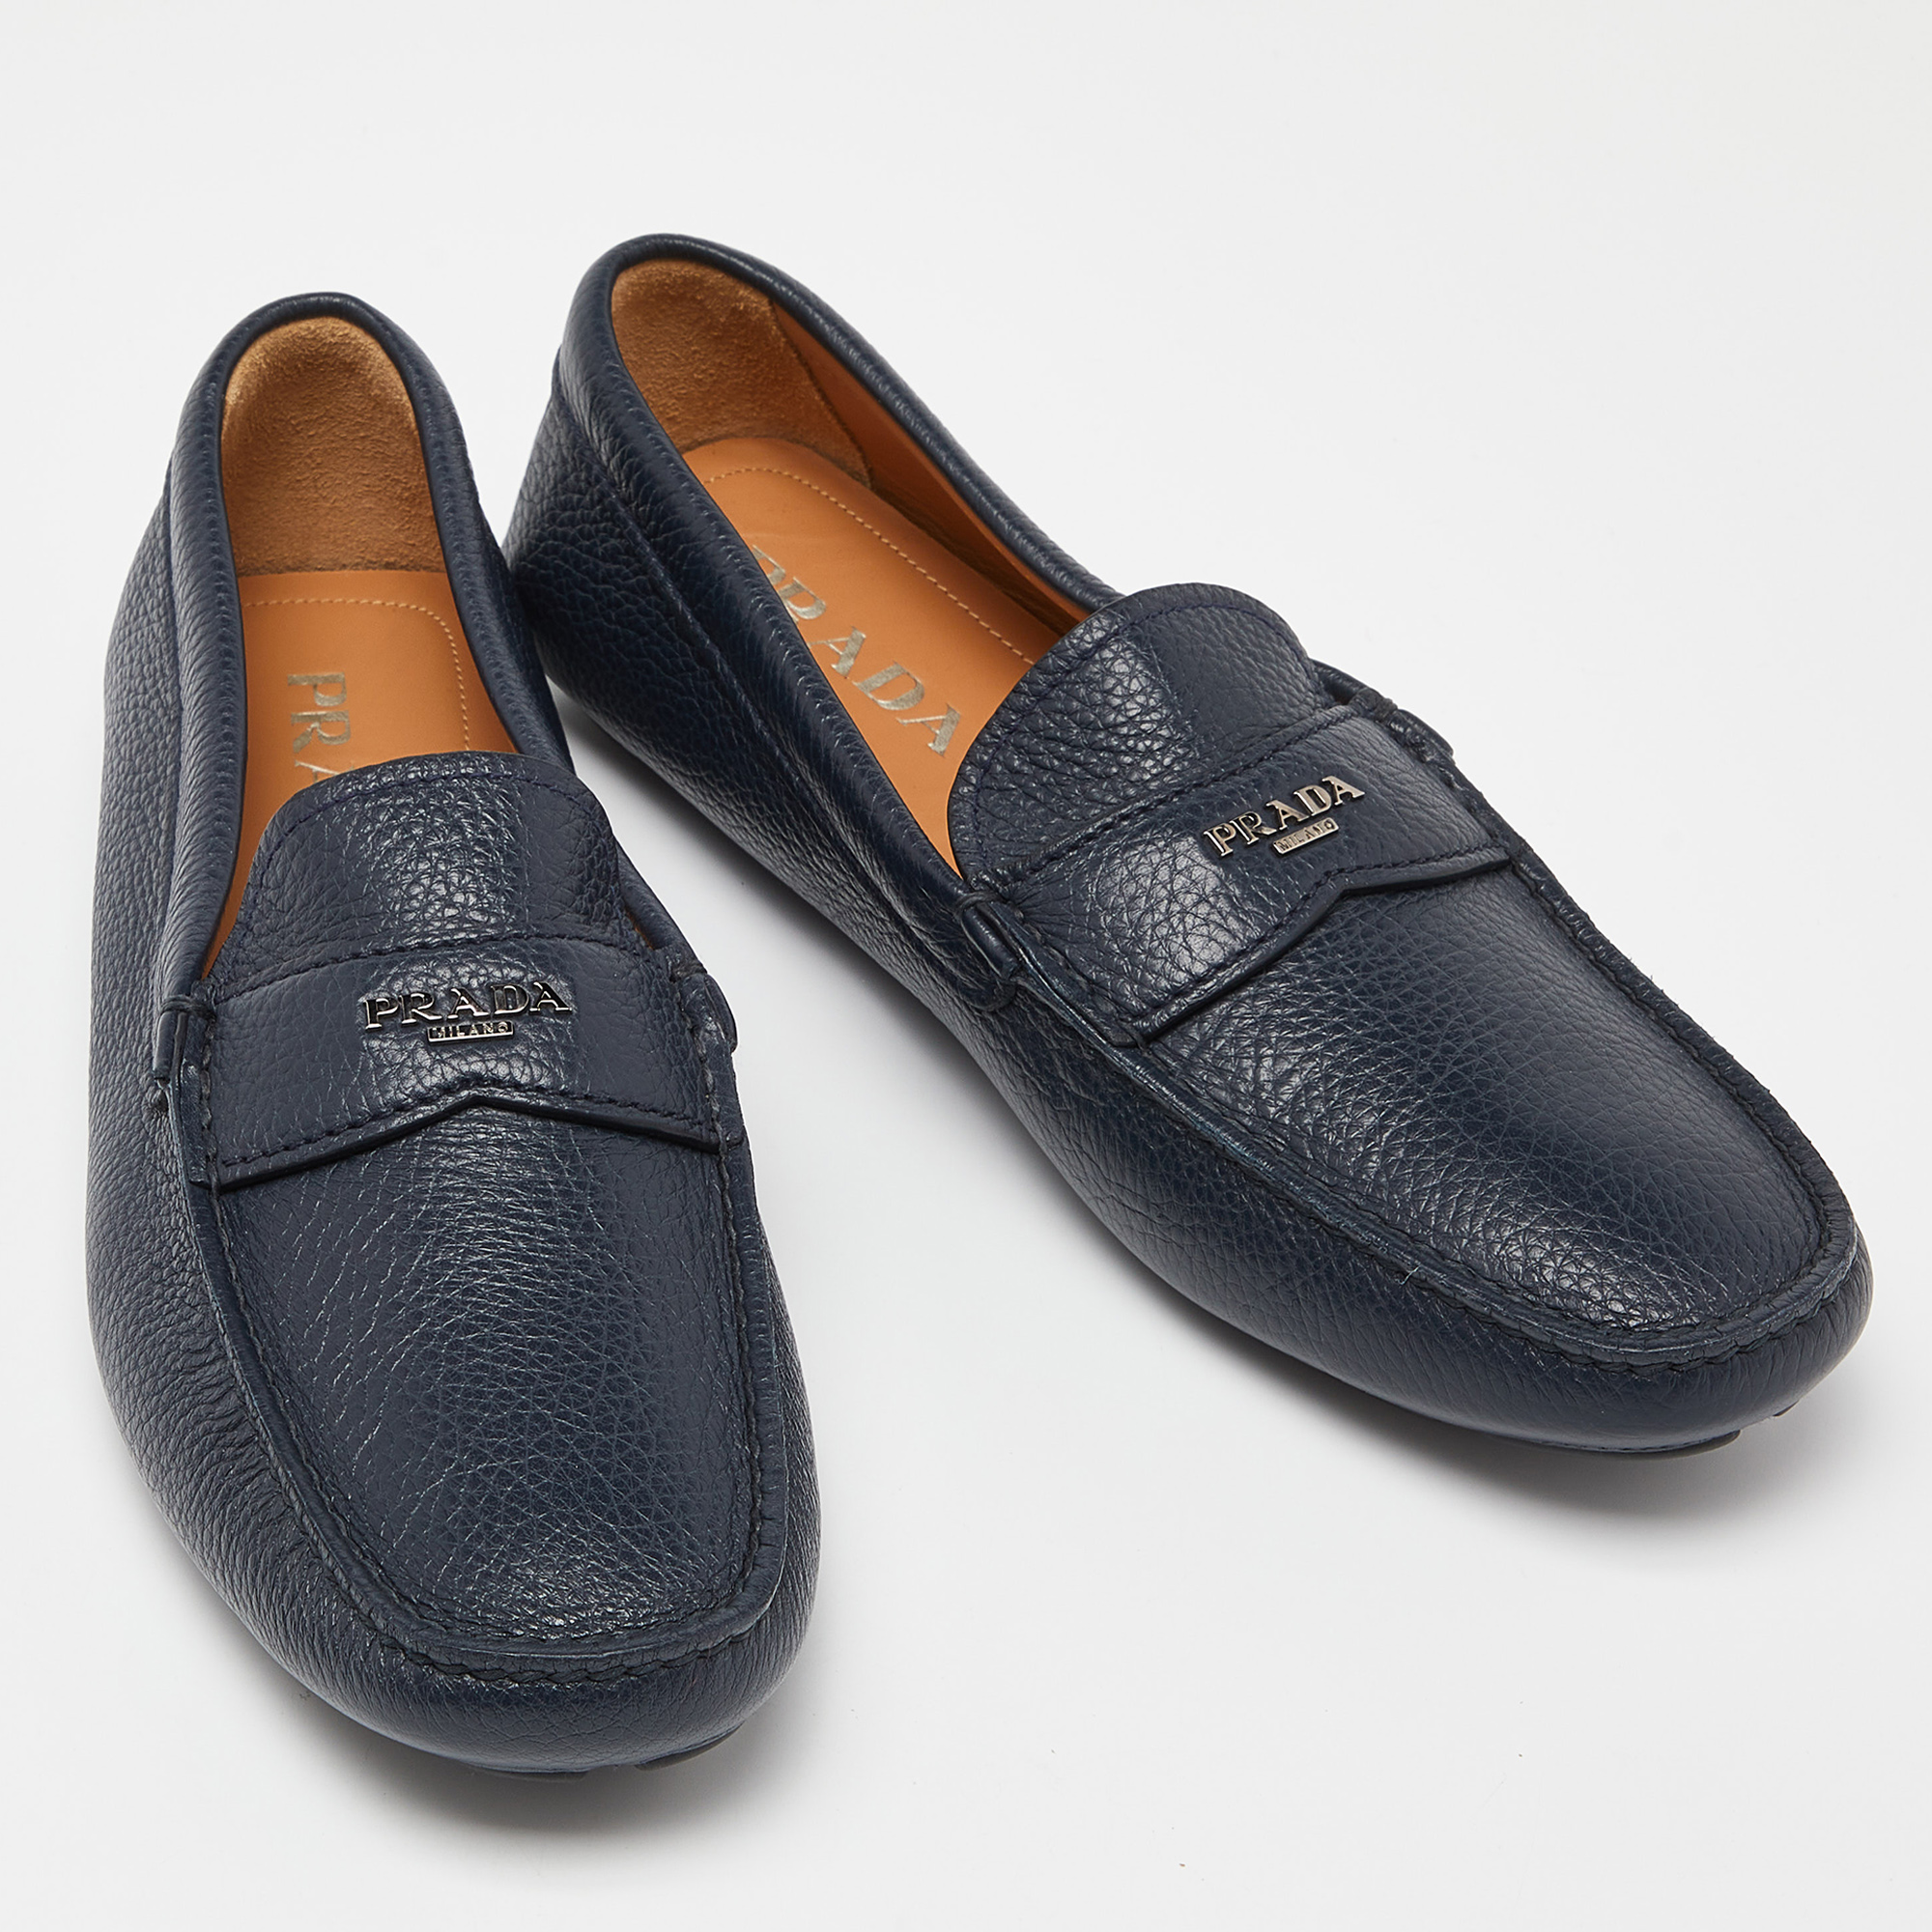 Prada Navy Blue Leather Penny Loafers Size 42.5